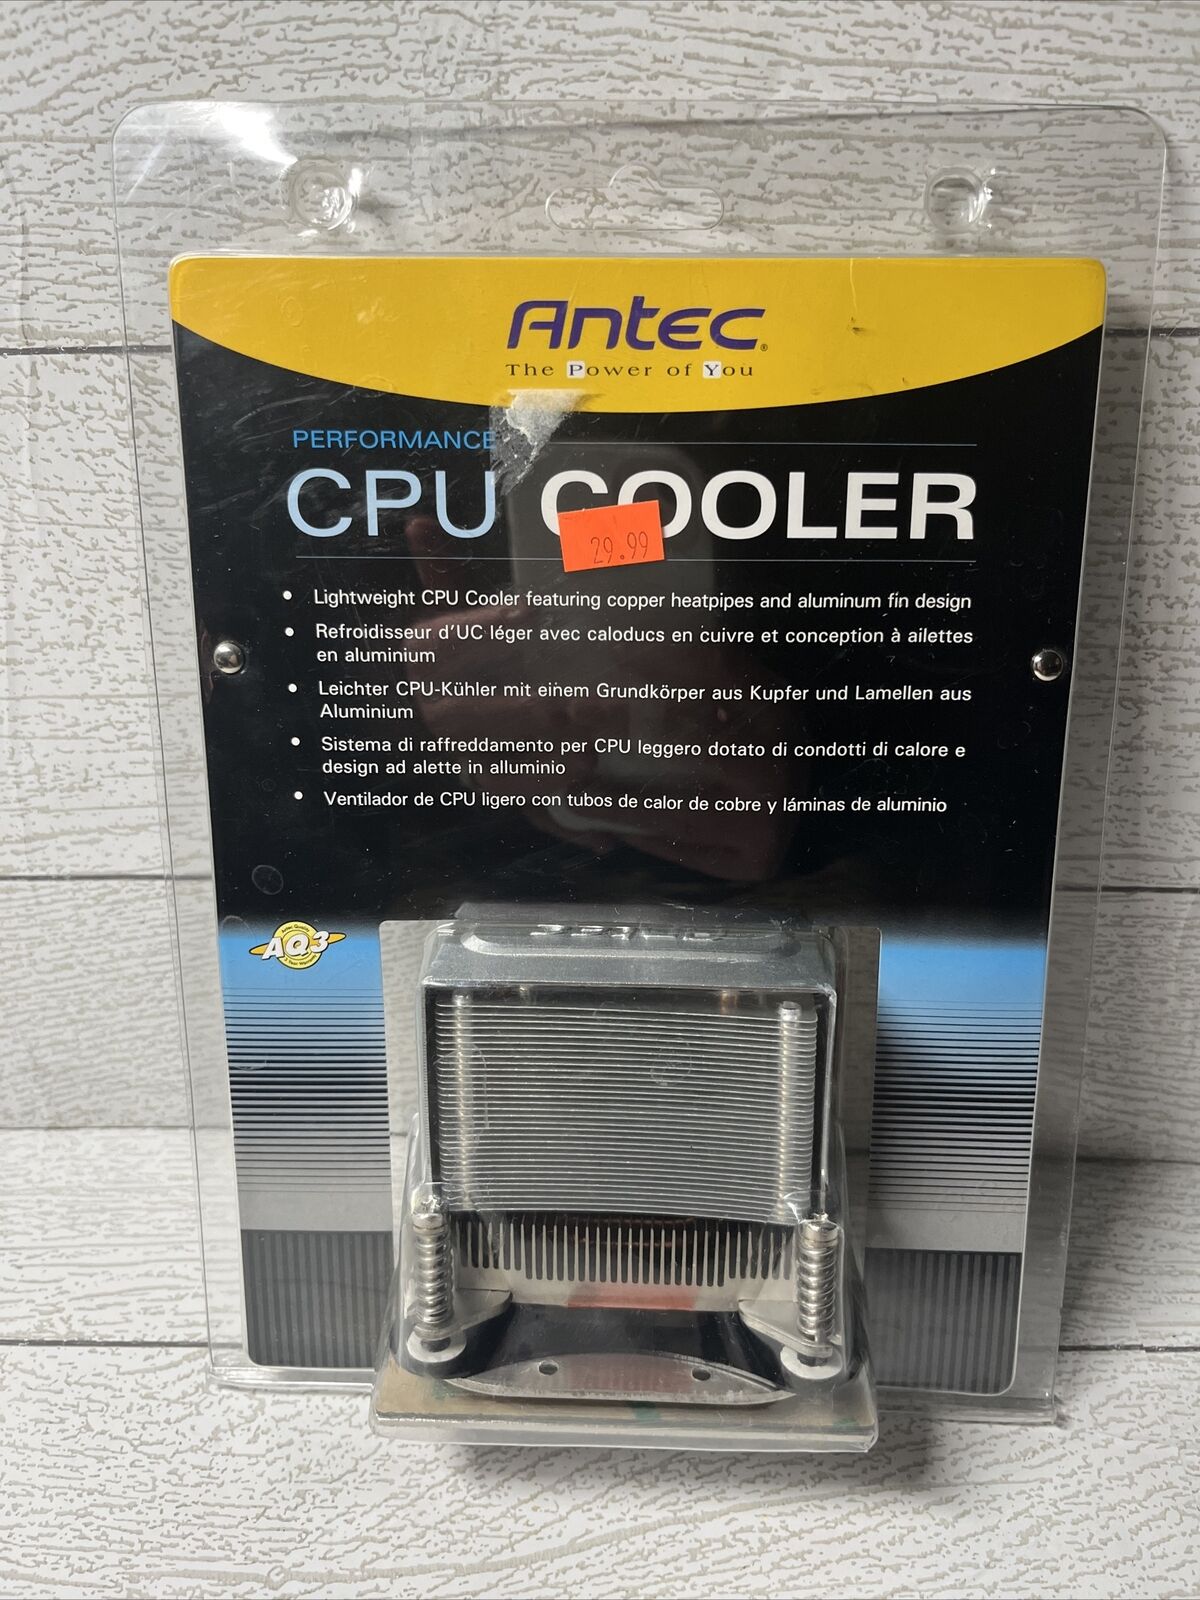 New Antec Performance CPU Cooler Intel & AMD New Sealed Package